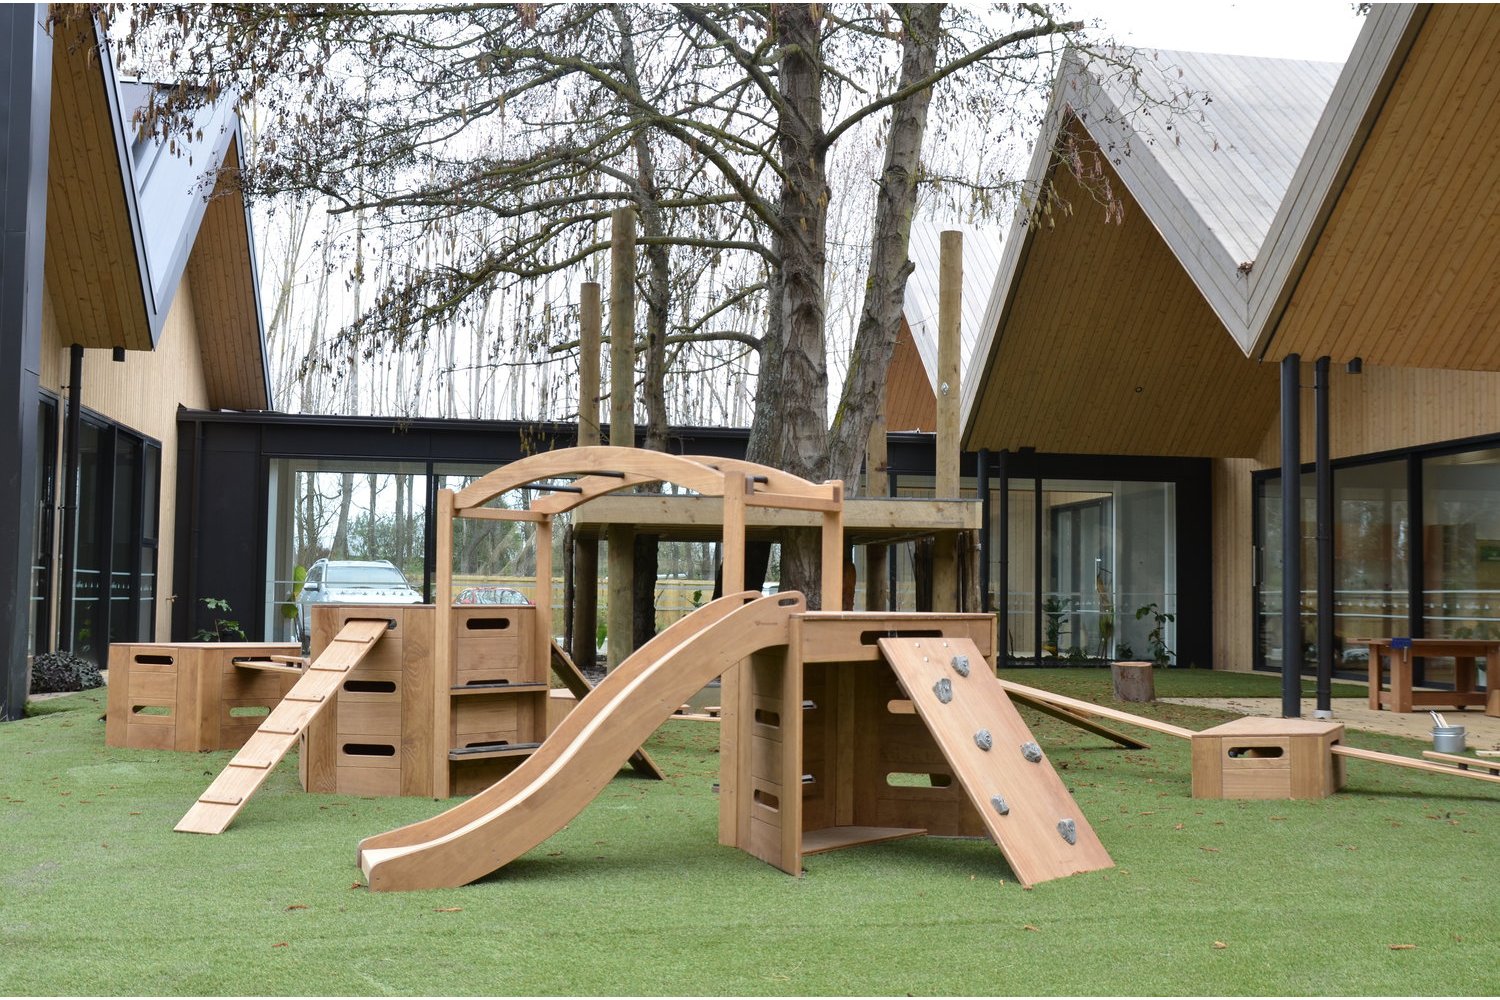 Outdorable Movable Play Equipment